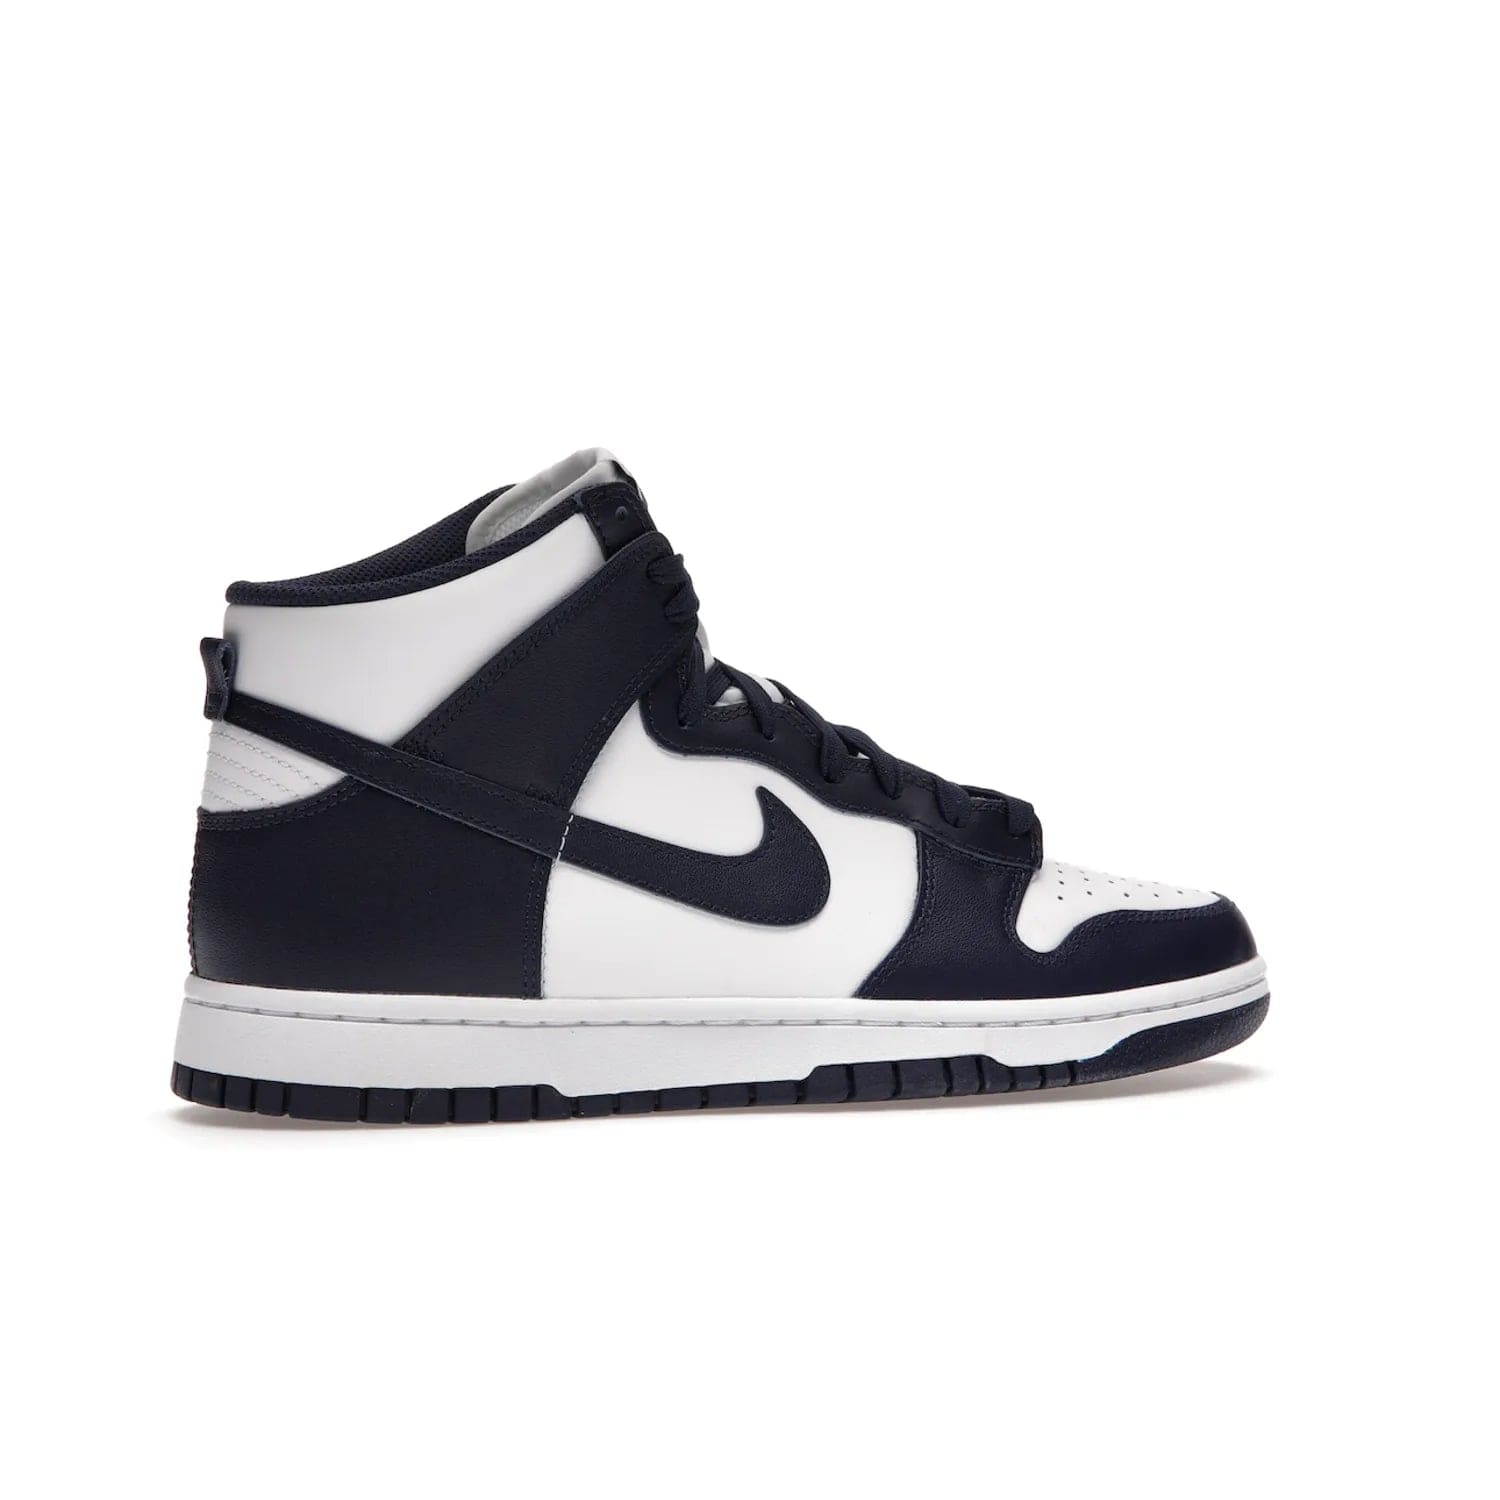 Nike Dunk High Championship Navy - Image 35 - Only at www.BallersClubKickz.com - Classic Nike Dunk High sneaker delivers an unforgettable style with white leather upper, Championship Navy overlays, and matching woven tongue label and sole. Make a statement with the Championship Navy today.